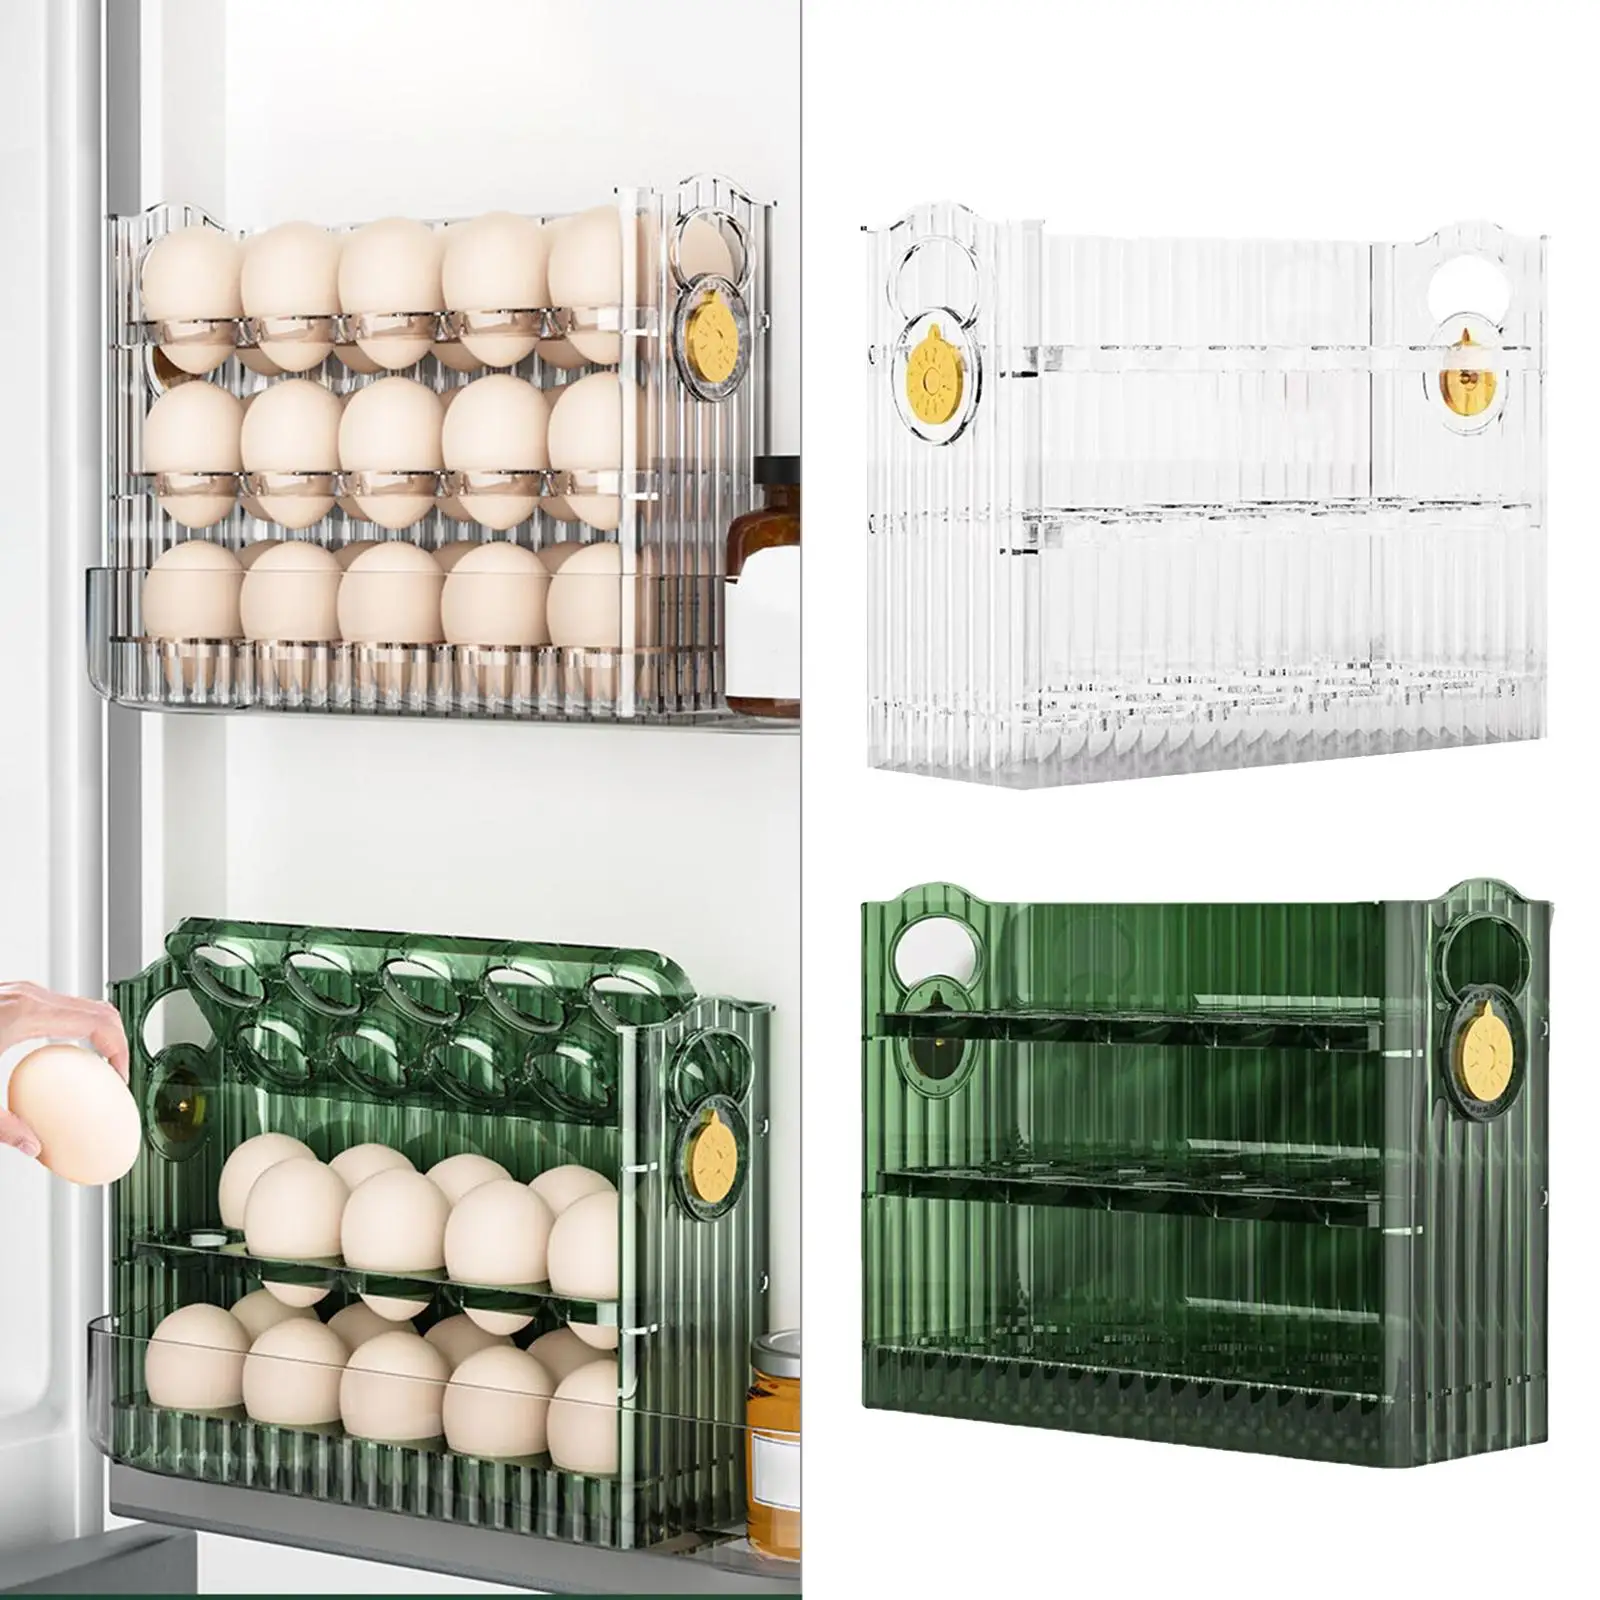 Refrigerator Egg Holder 30 Grid Egg Tray Large Capacity Multipurpose Sturdy for Countertop Table